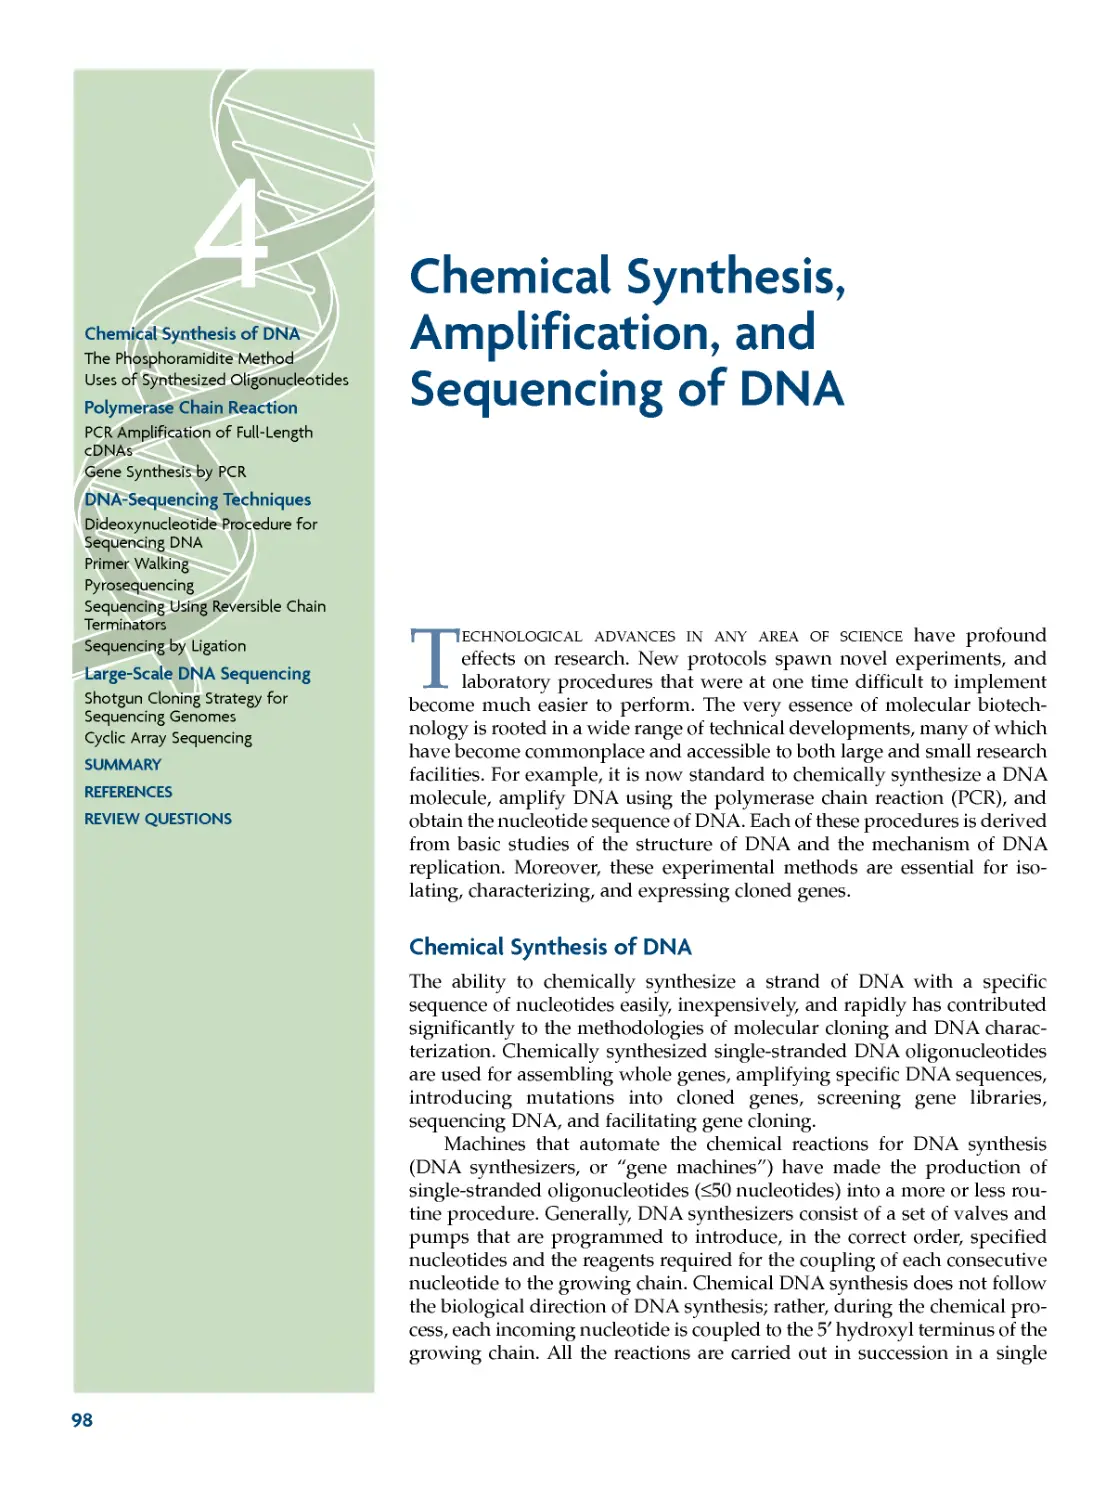 Chapter 4 Chemical Synthesis, Amplification, and Sequencing of DNA